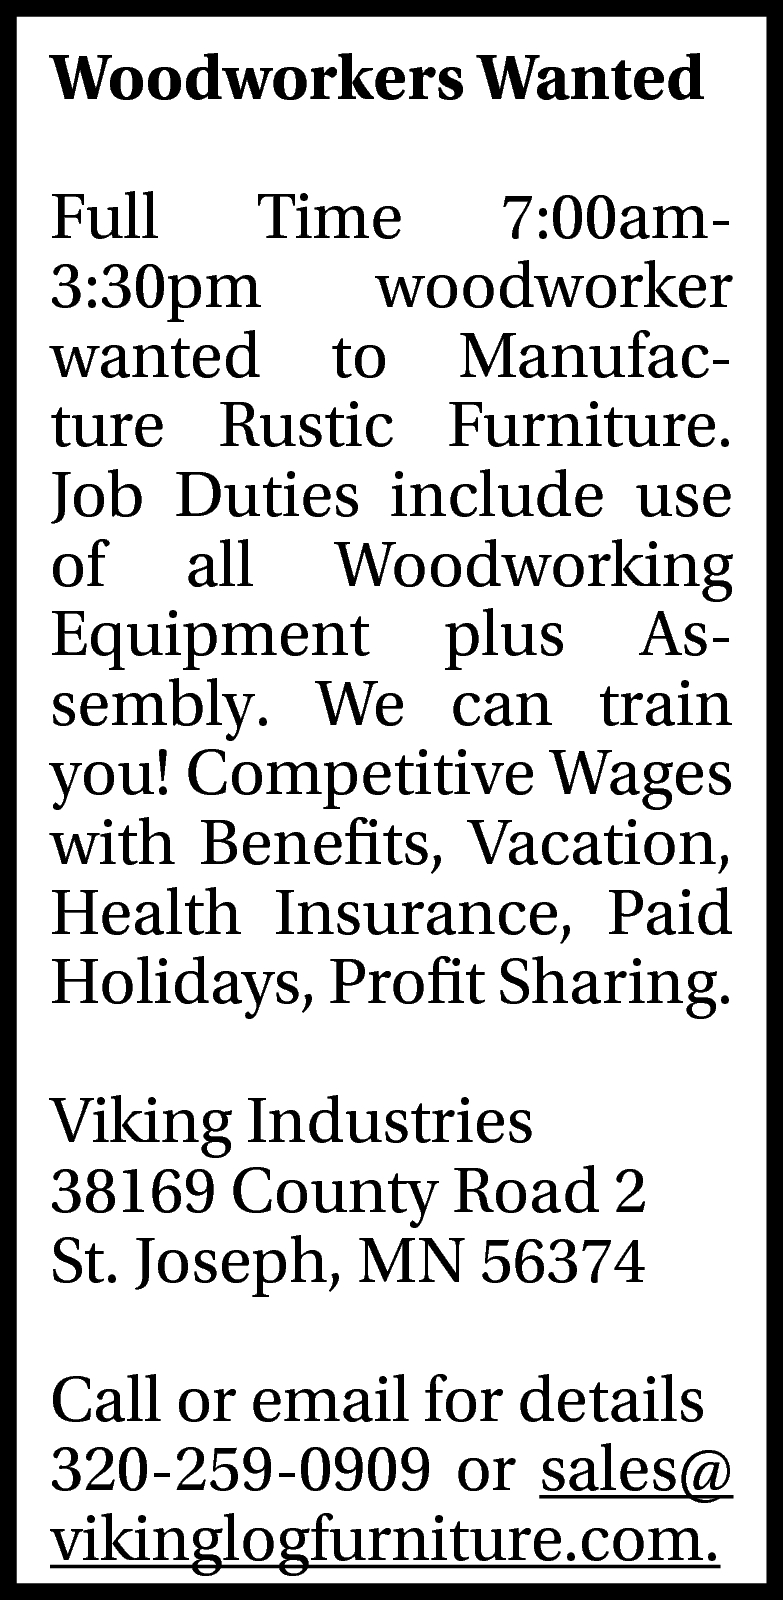 Woodworkers Wanted